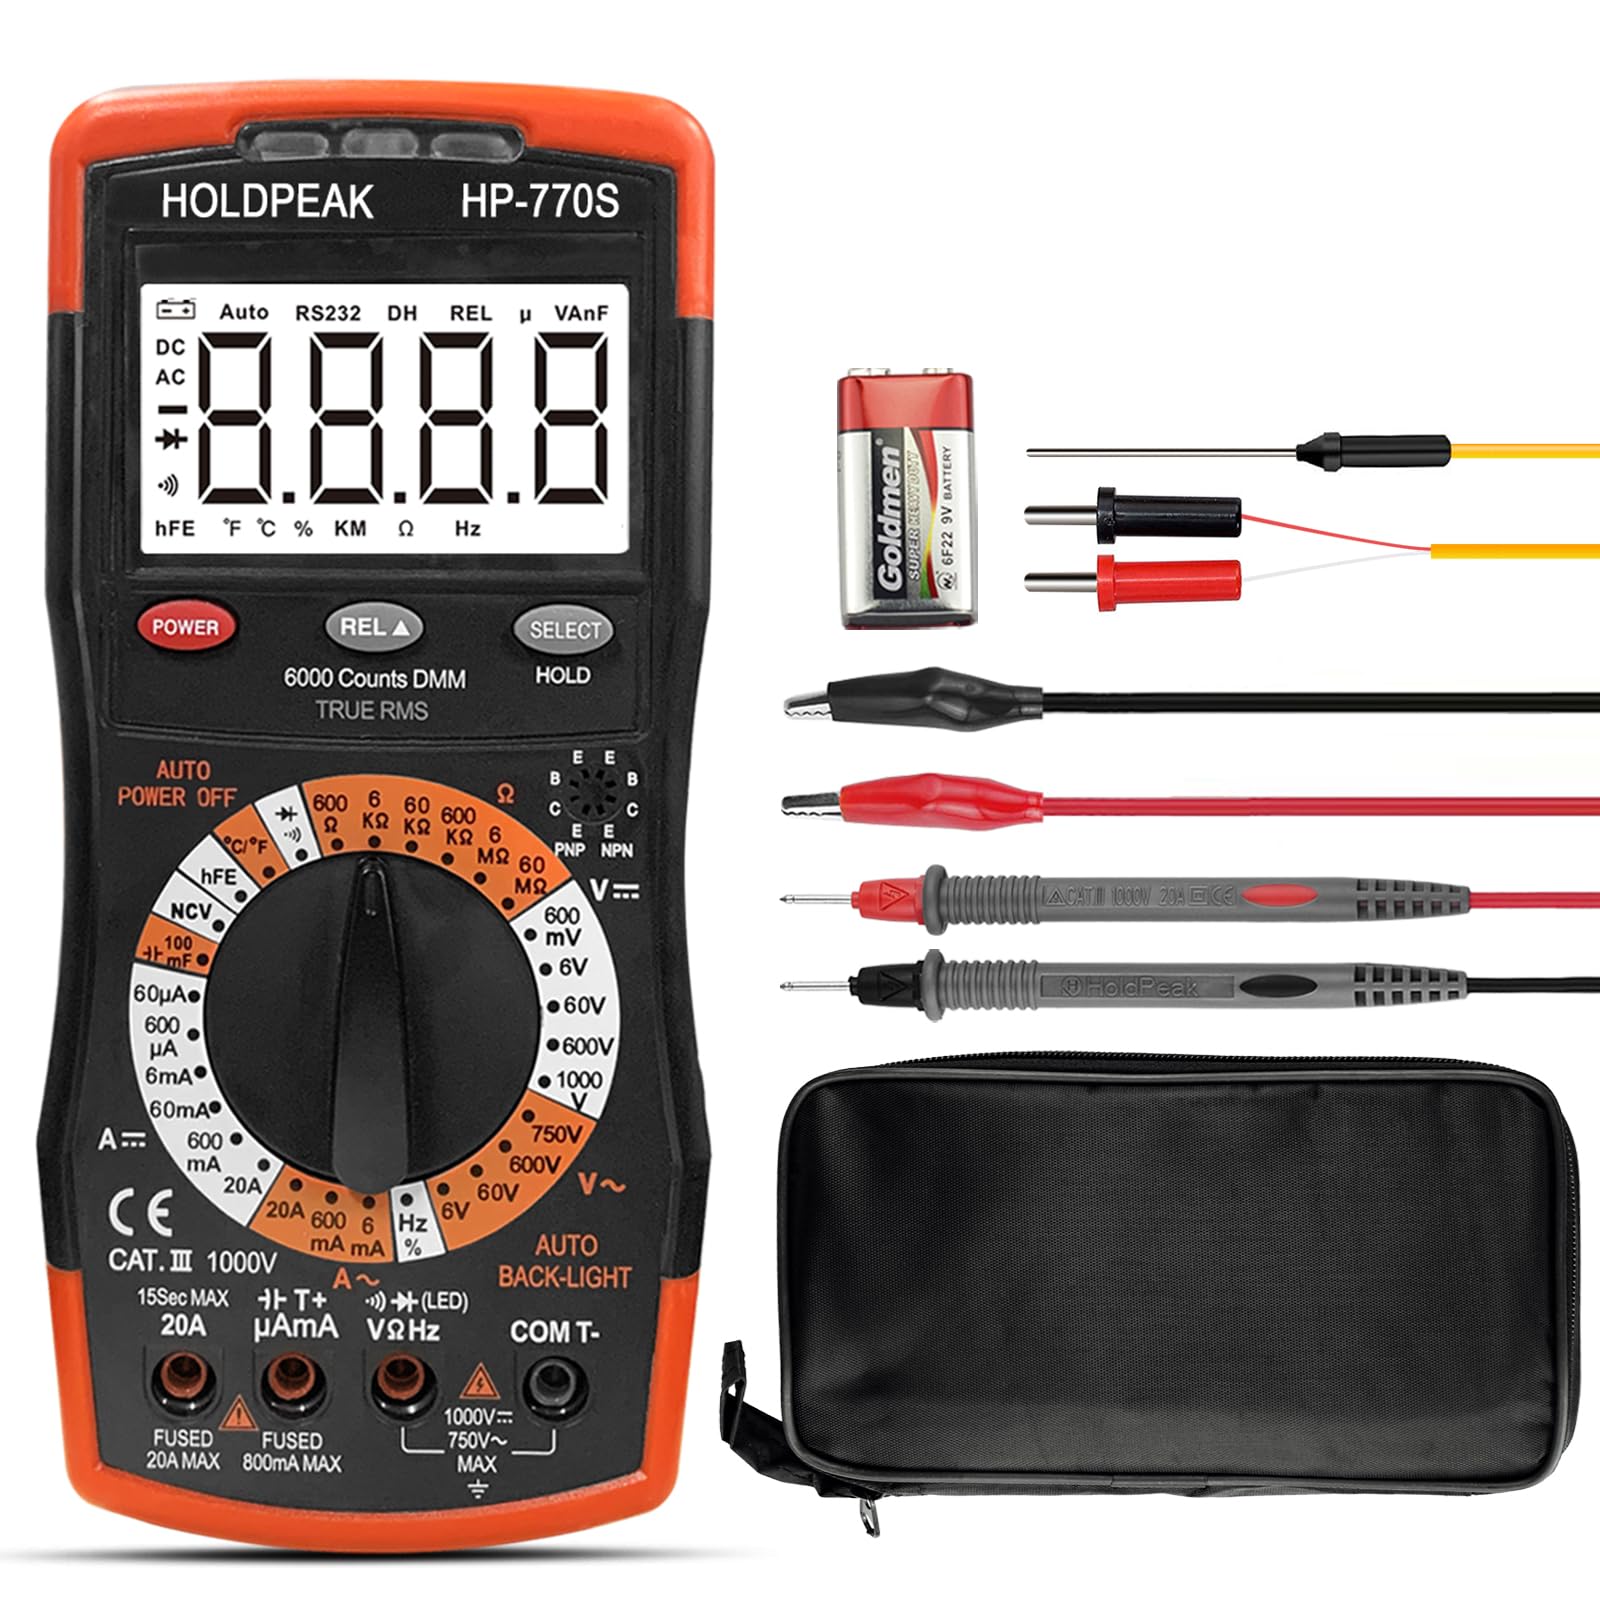 HoldPeak Digital Multimeter HP-770S 6000 Counts Manual Ranging,Accurately Measure for AC/DC Voltage Tester/NCV, Resistance, Frequency, Continuity, Diode, hFE von HoldPeak